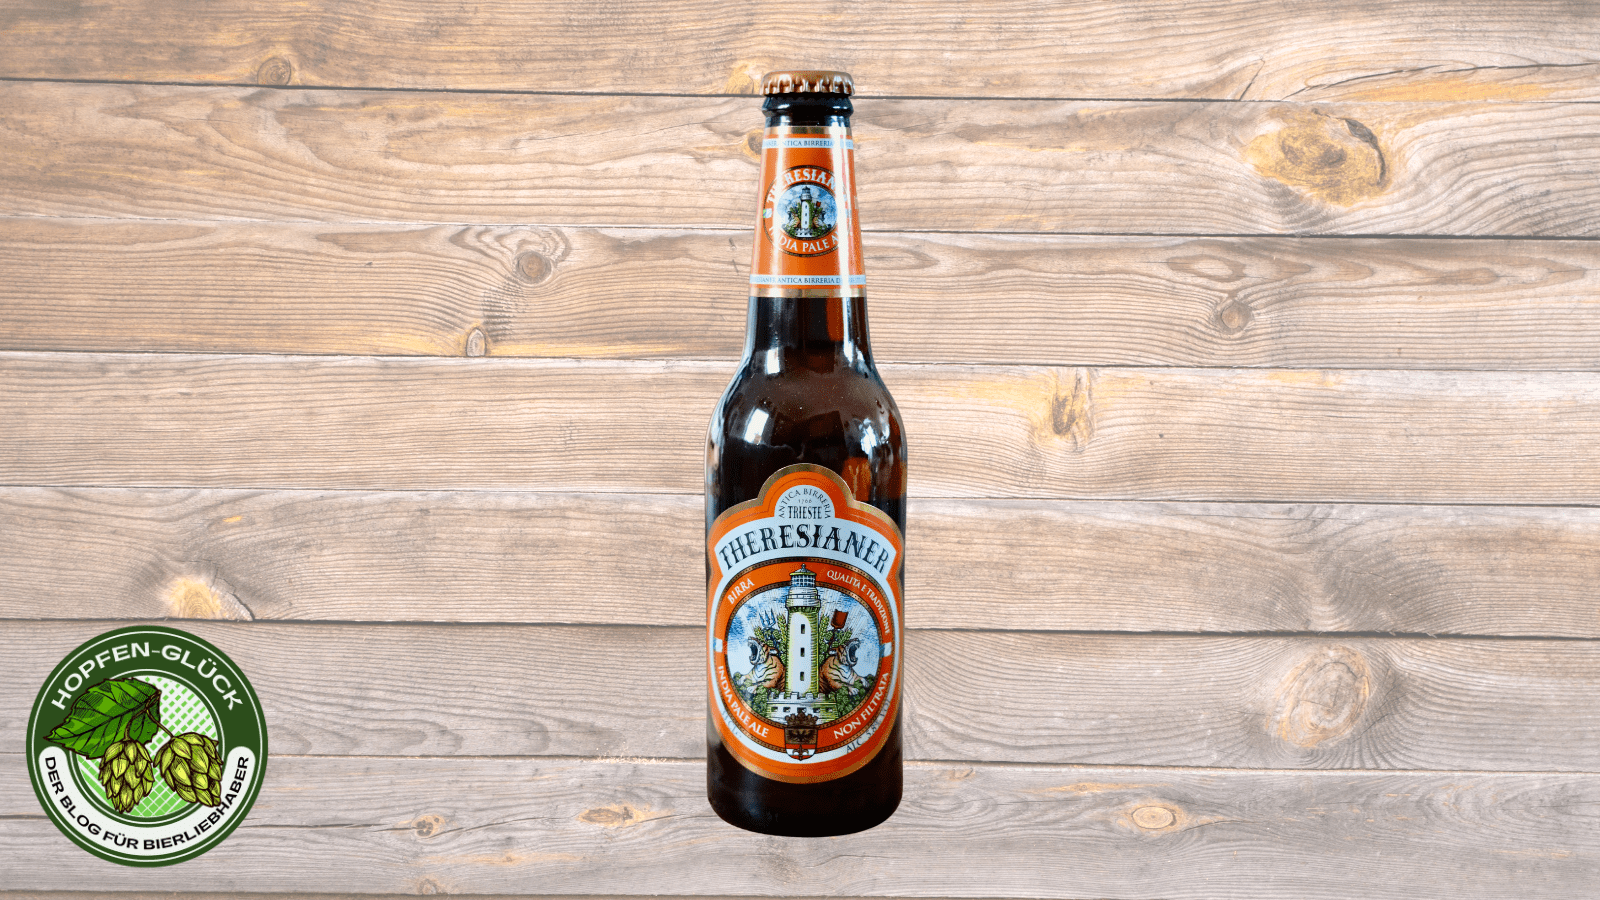 Theresianer – India Pale Ale